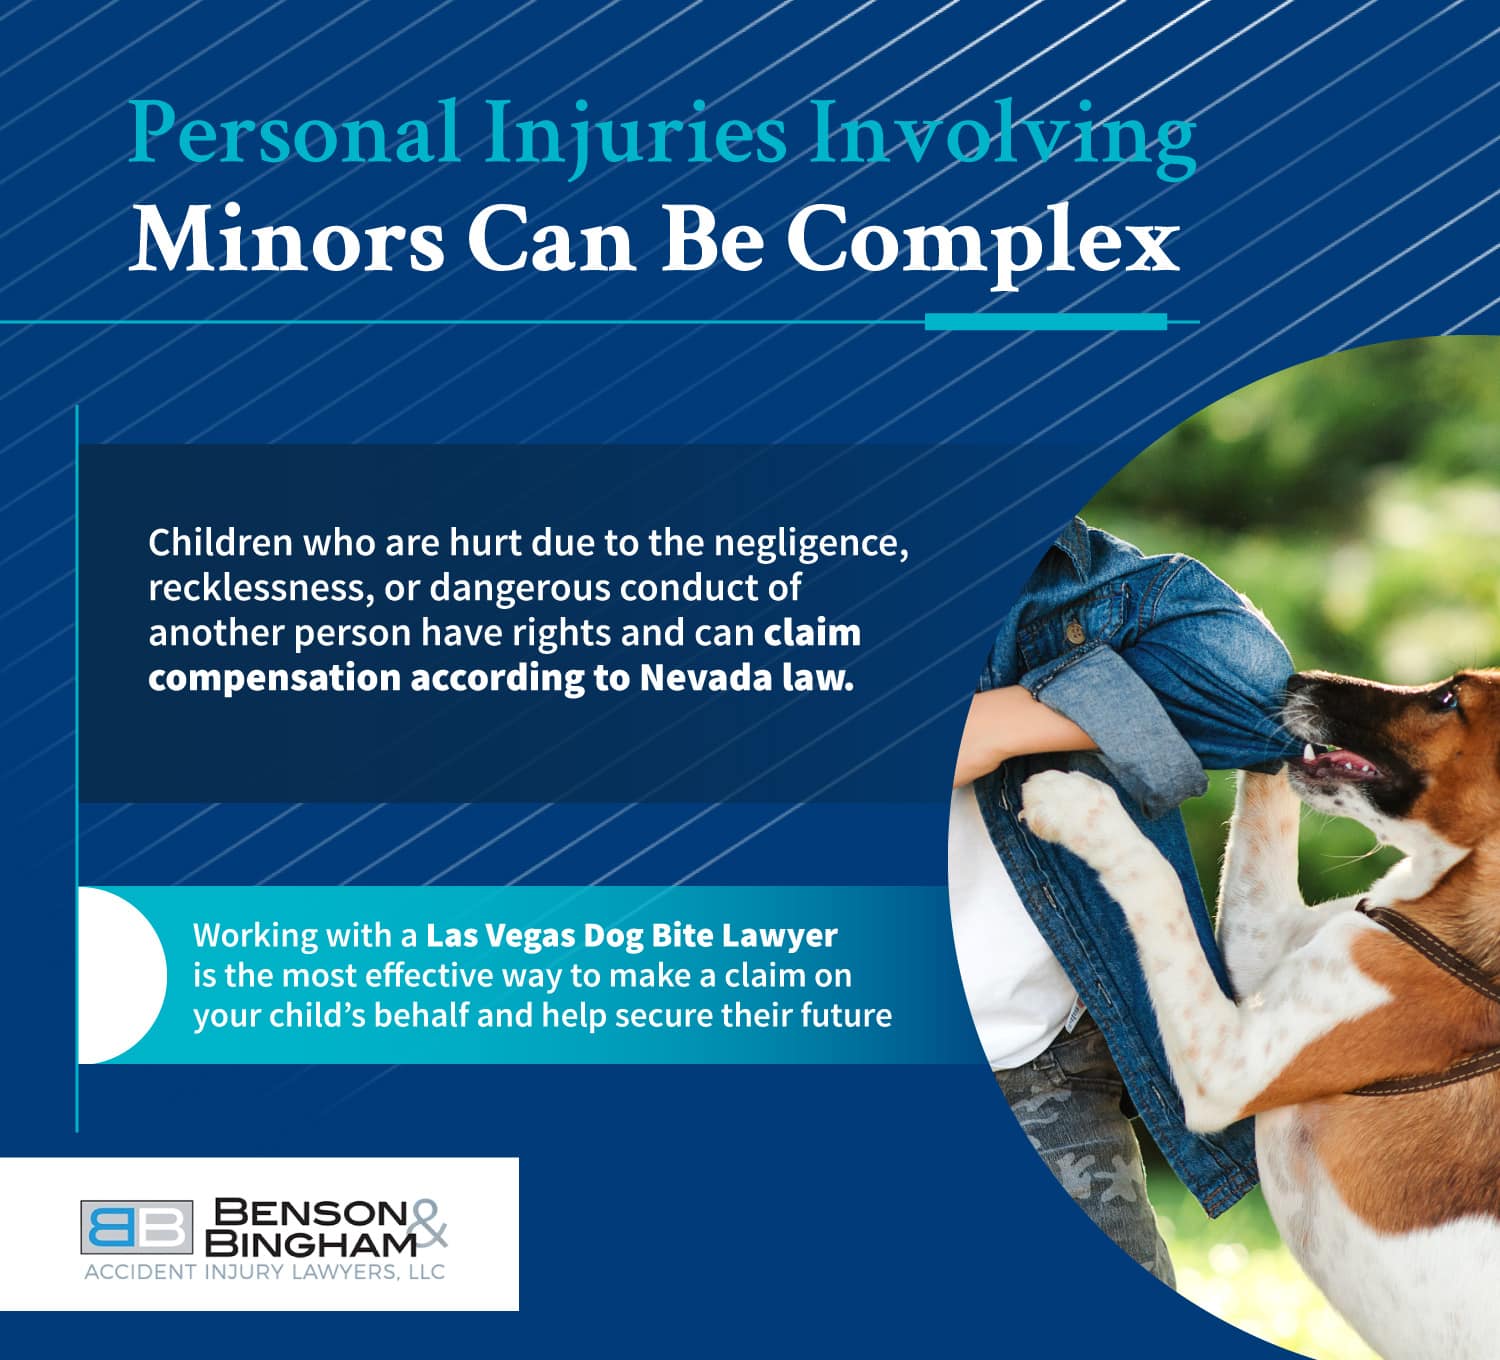 Infographic that shows how personal injuries involving minors can be complex